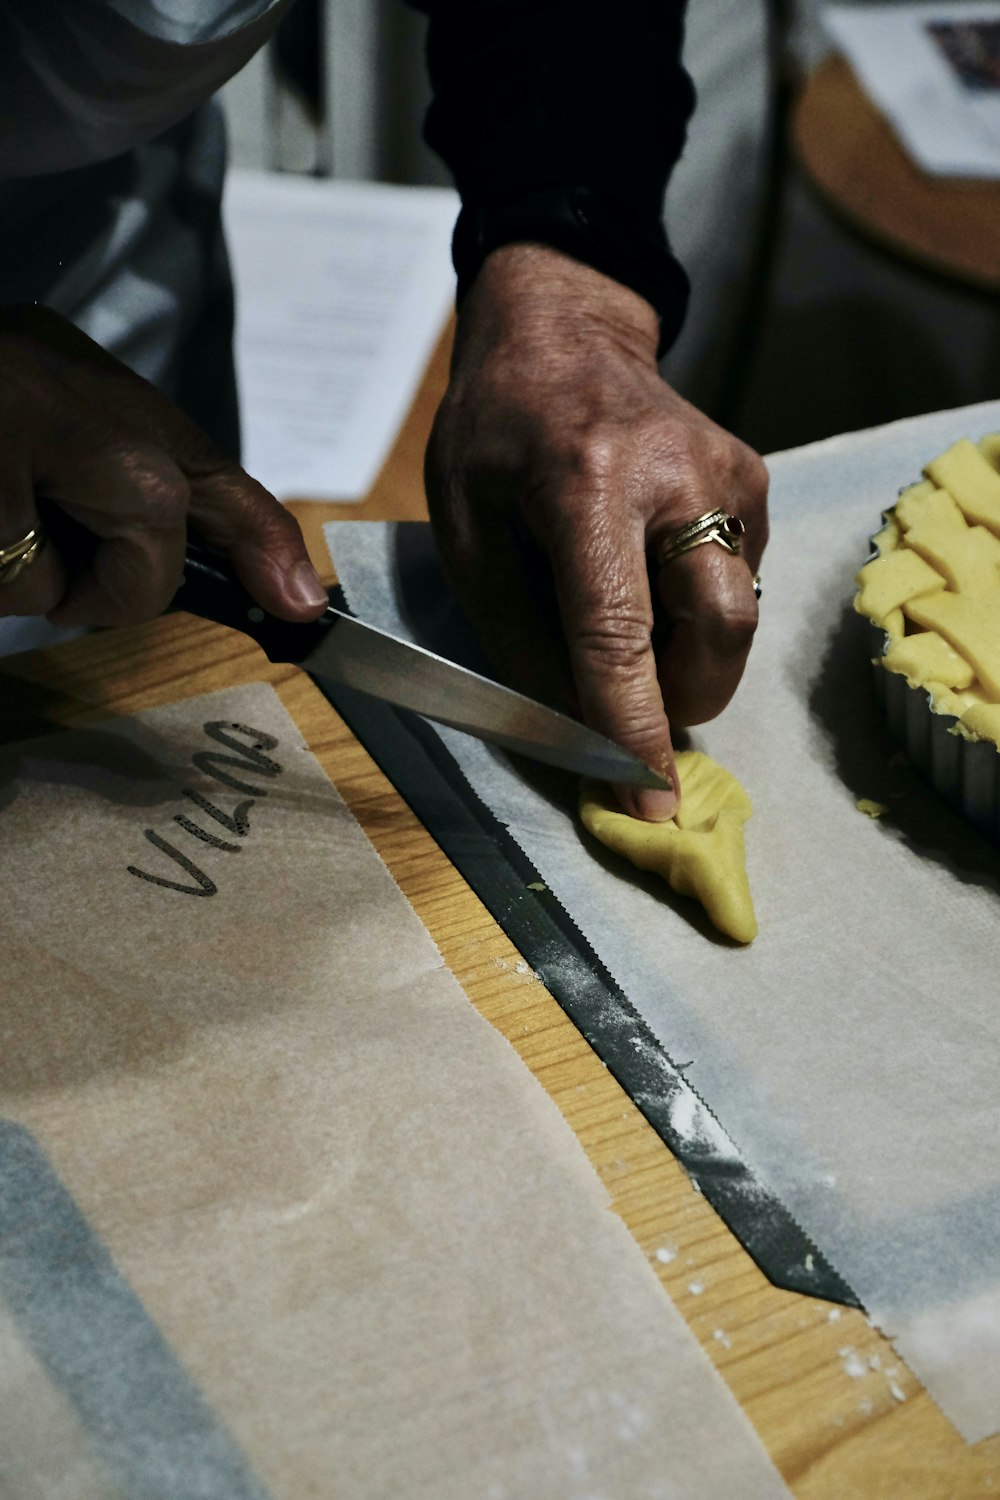 a person cutting a pie with a knife